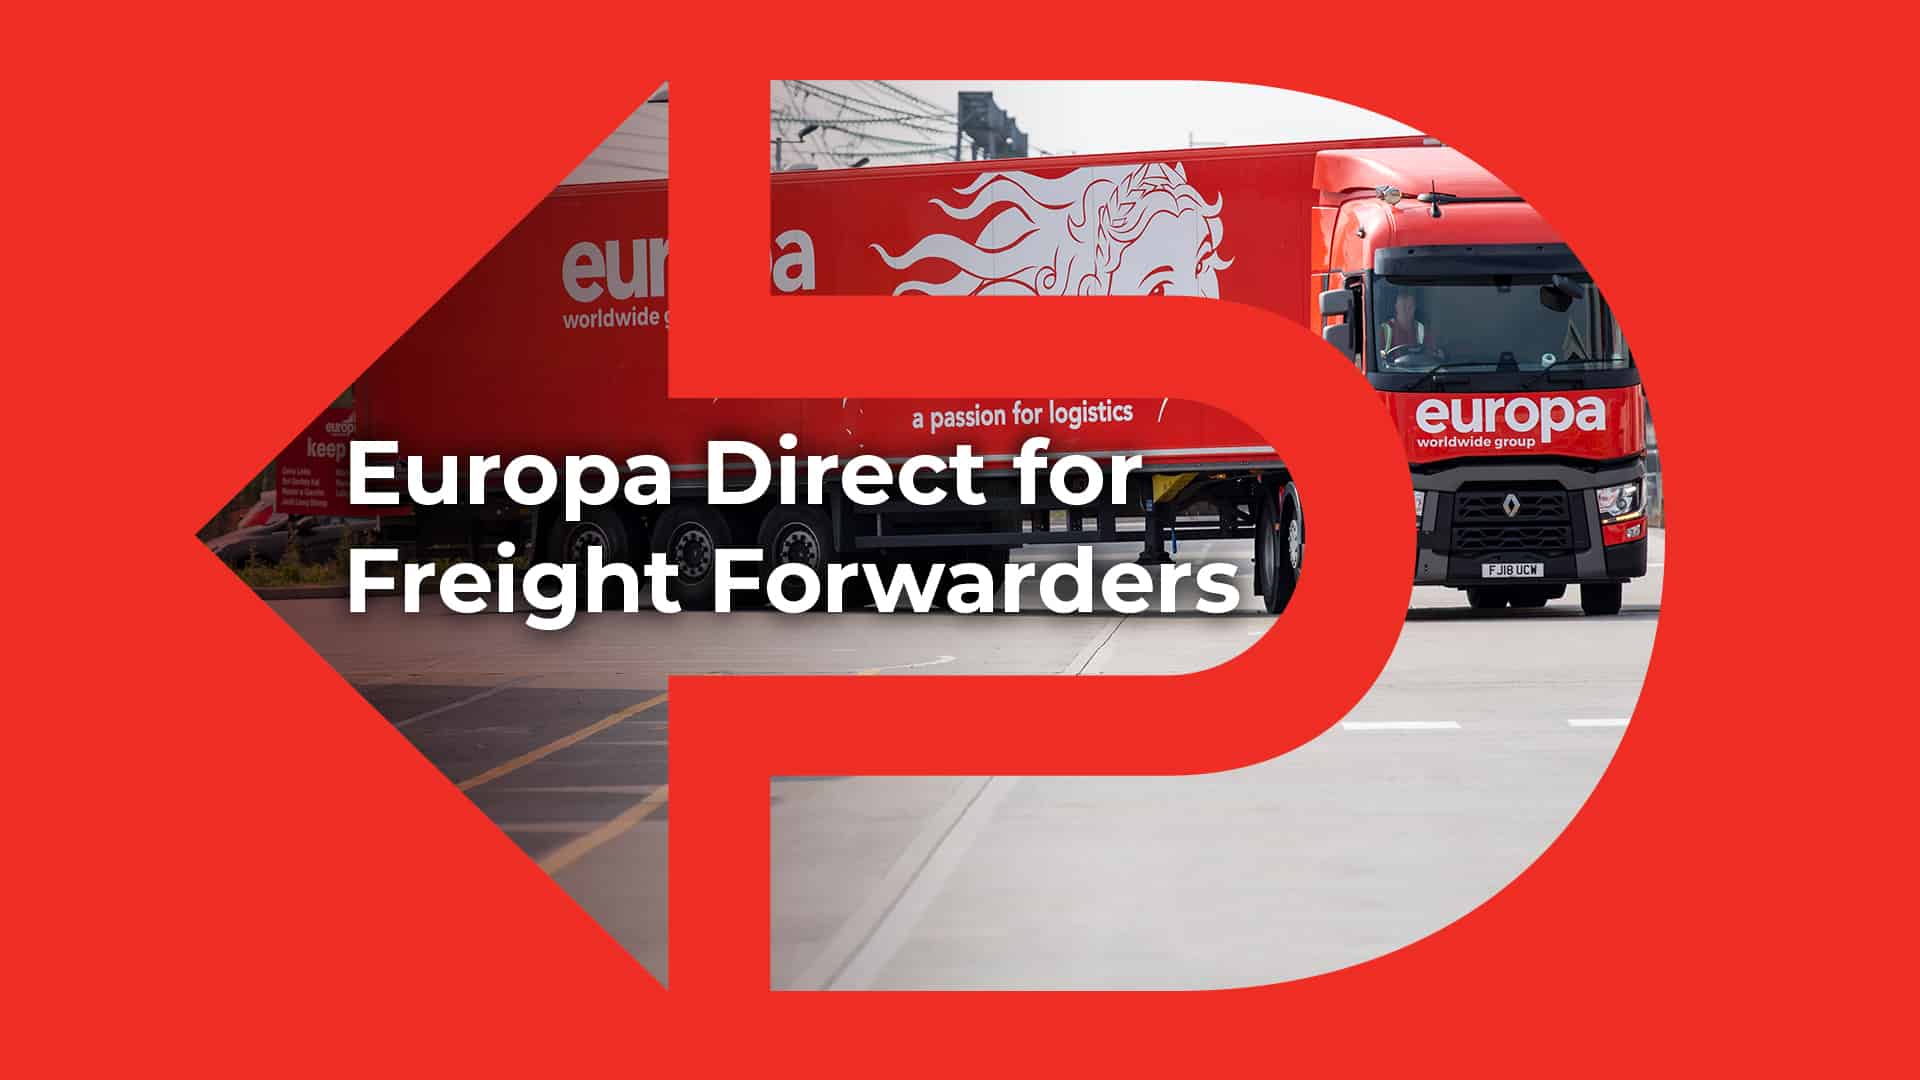 Europa Direct for Freight Forwarders